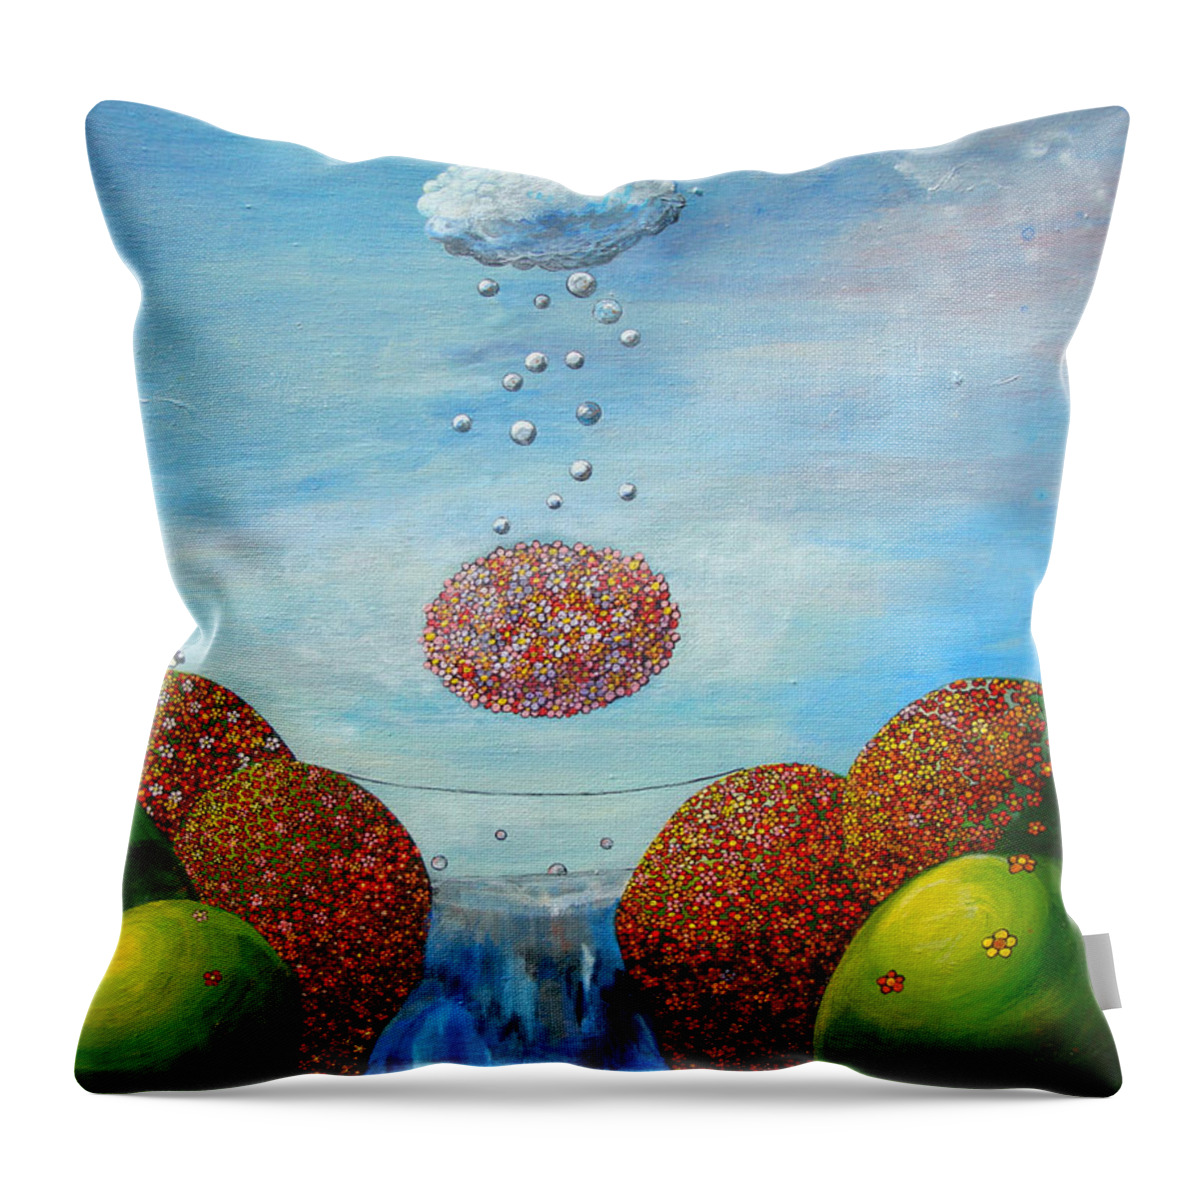  Throw Pillow featuring the painting Life's Path by Mindy Huntress